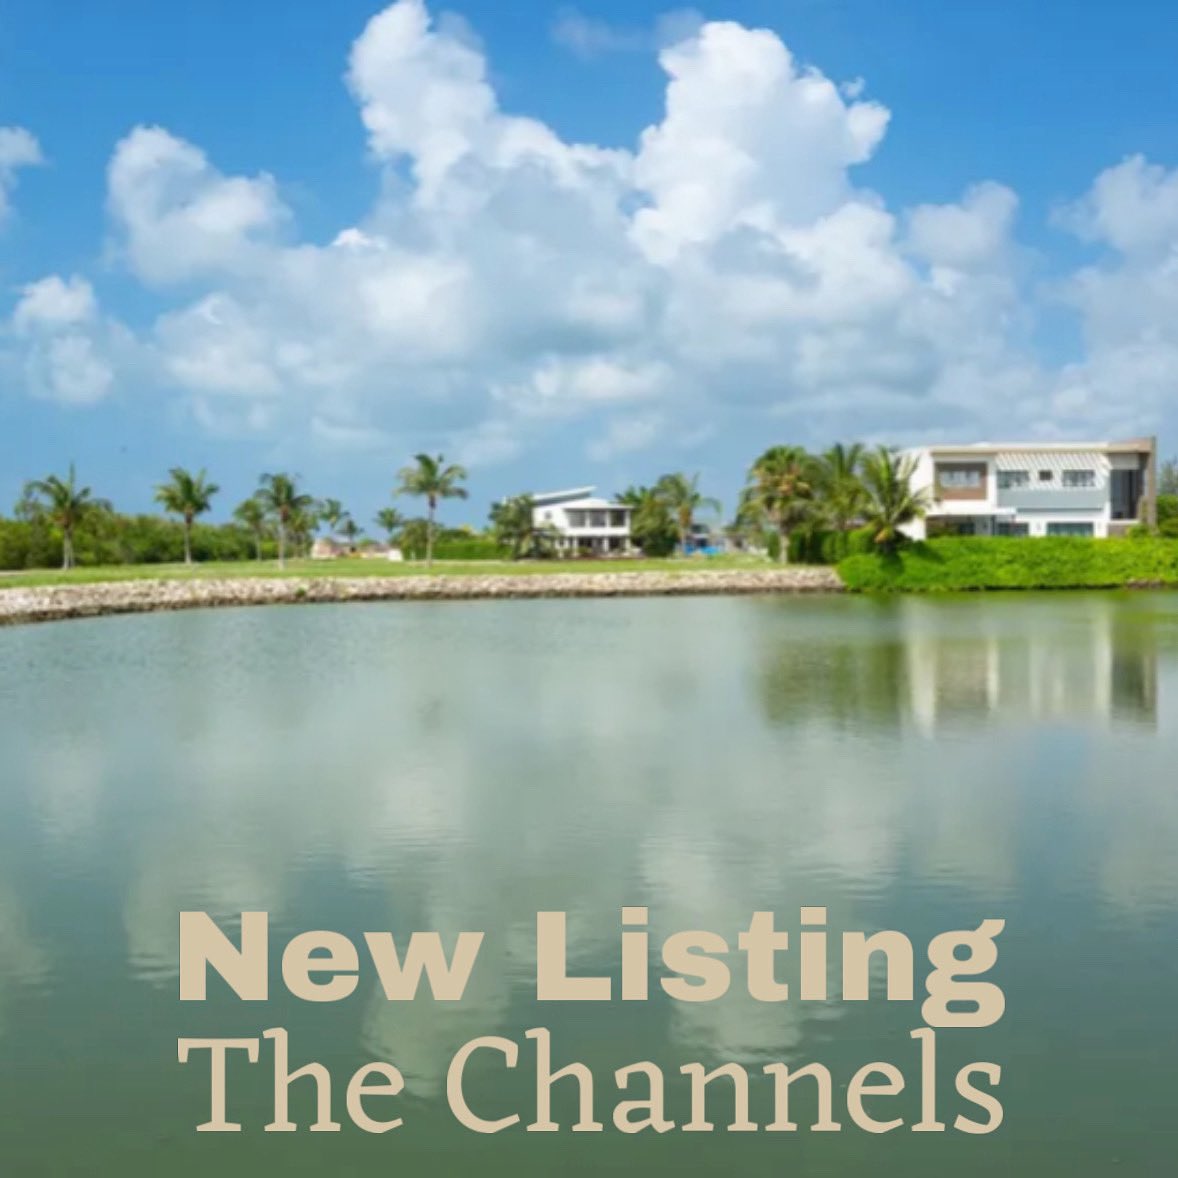 The Channels

Affordable canal front living close to schools, shops & Spotts Beach to swim with turtles

underground utilities in place

Member of CIREBA 
MLS # 416534

#Cayman #LandParcel 
#CaymanRealEstate #caymansothebysrealty #caymanislandsrealestate